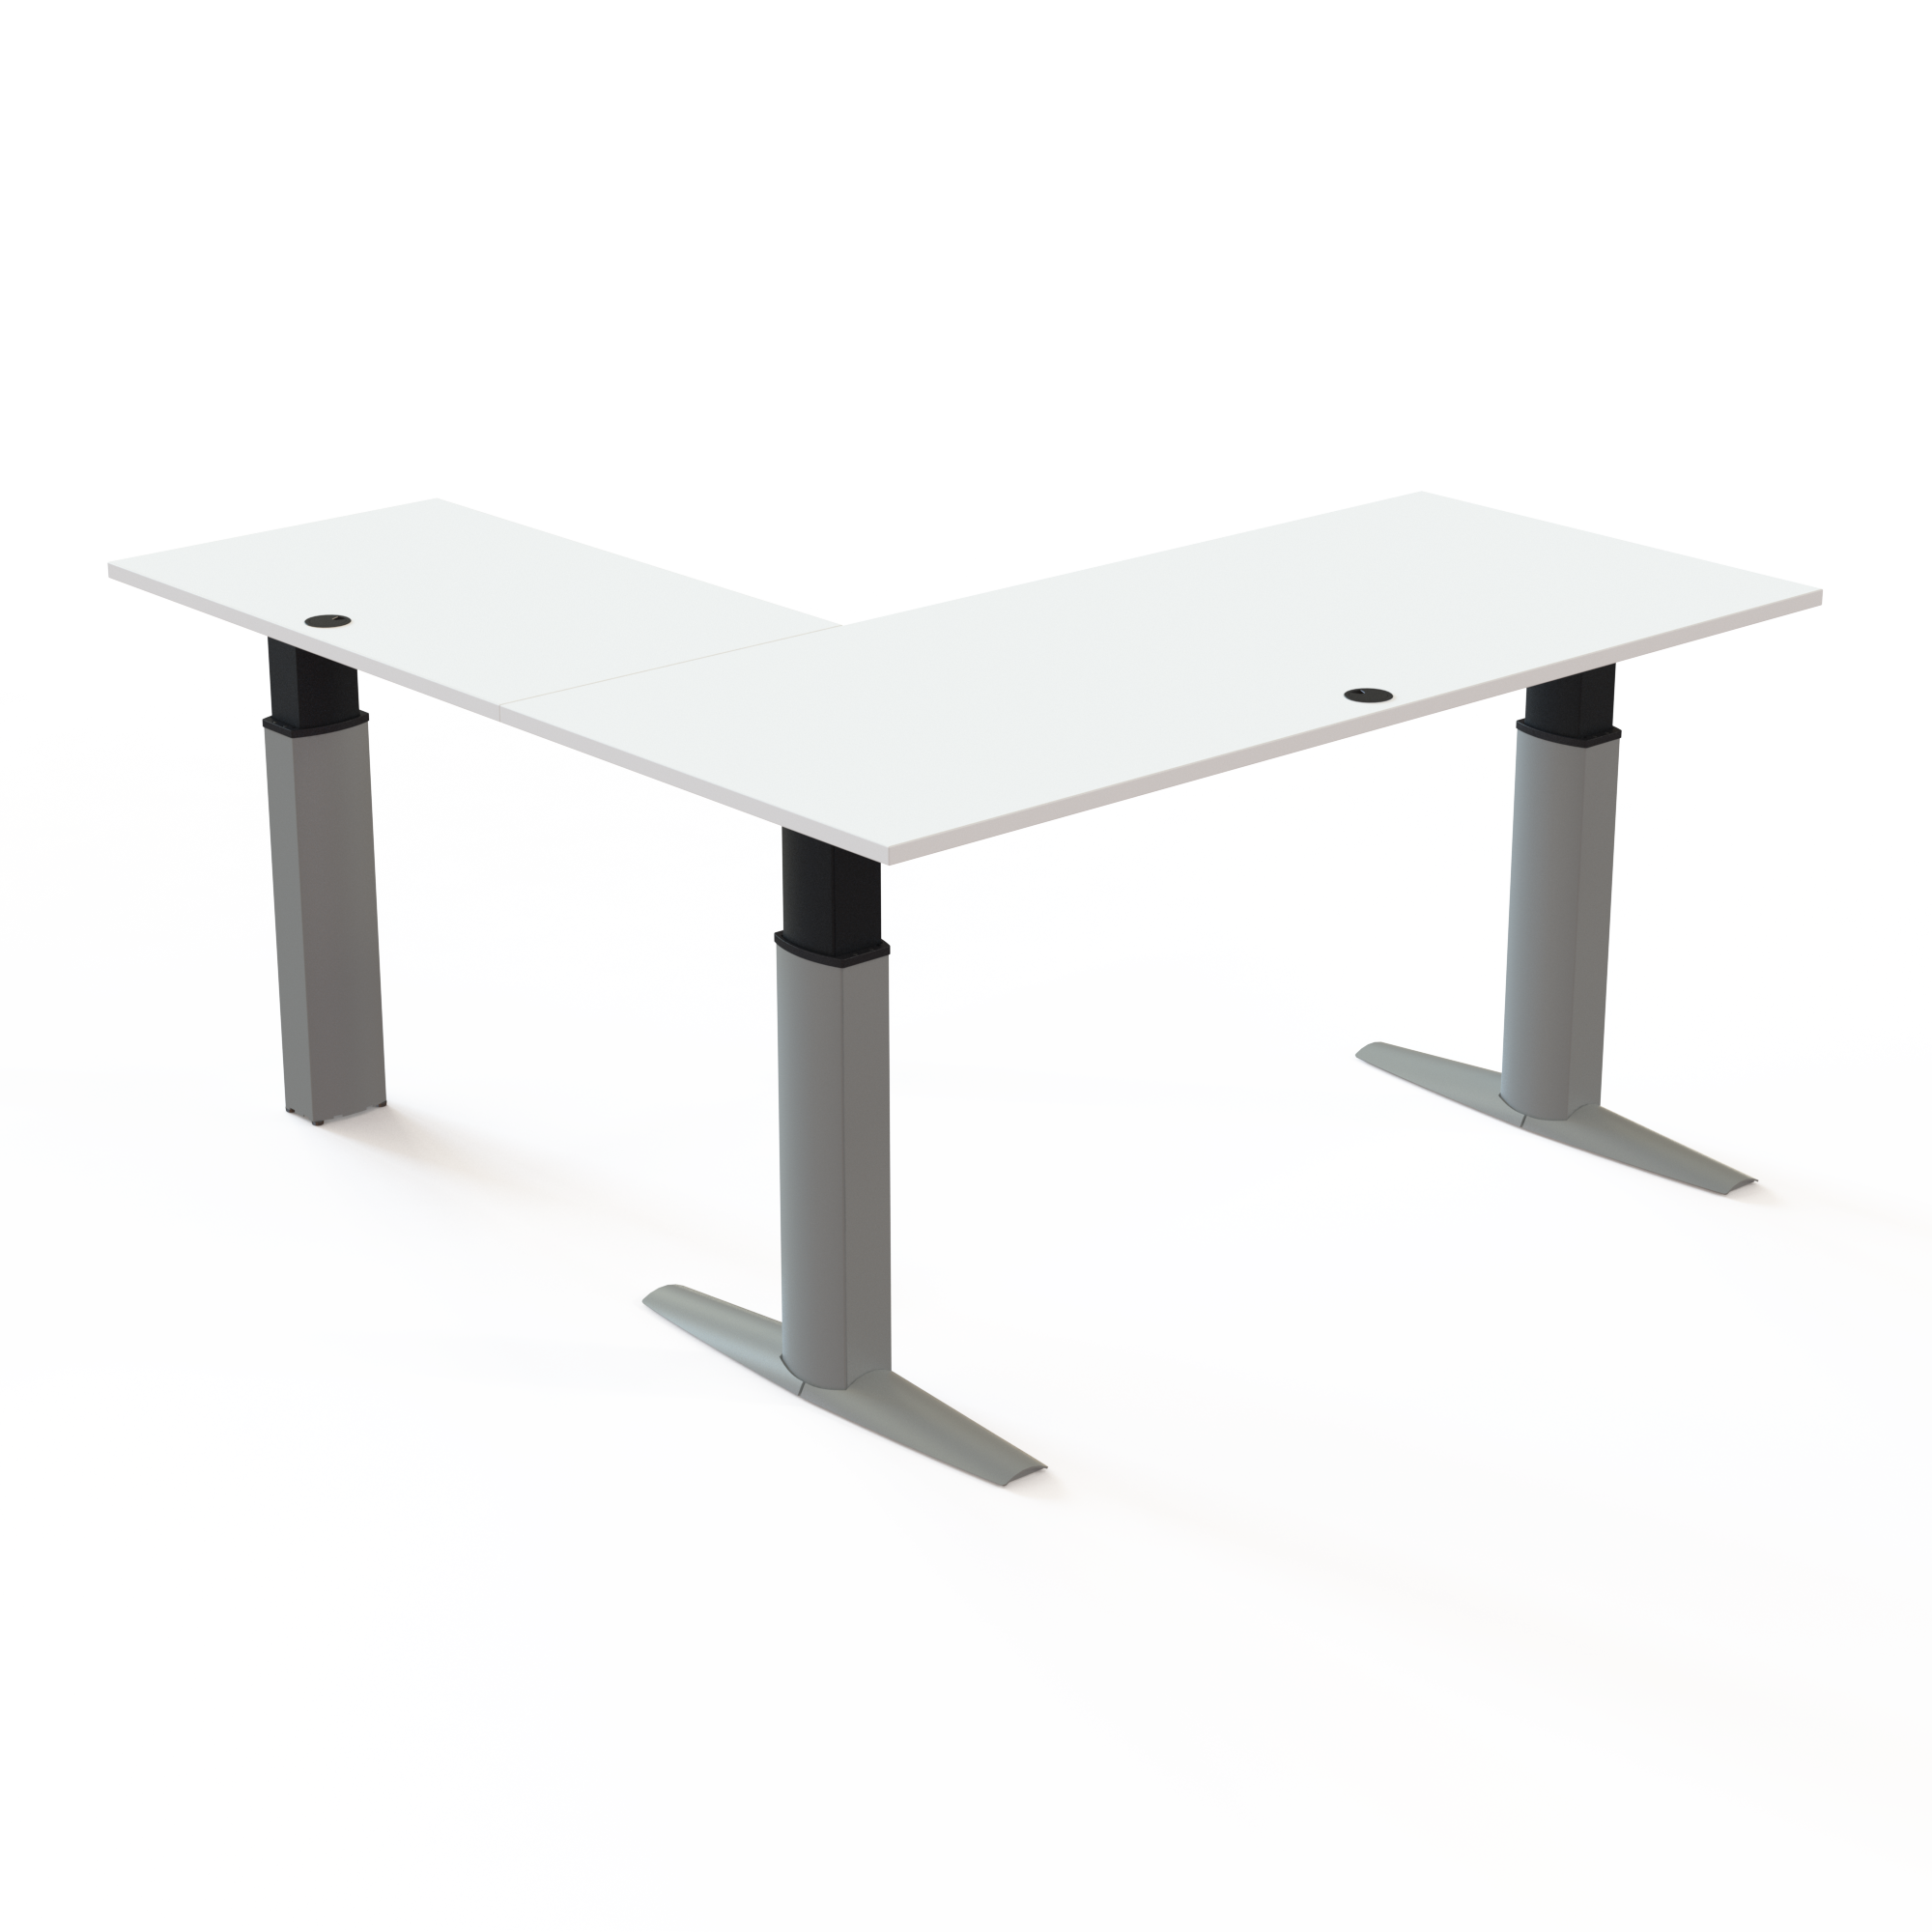 Electric Adjustable Desk | 180x180 cm | White with silver frame